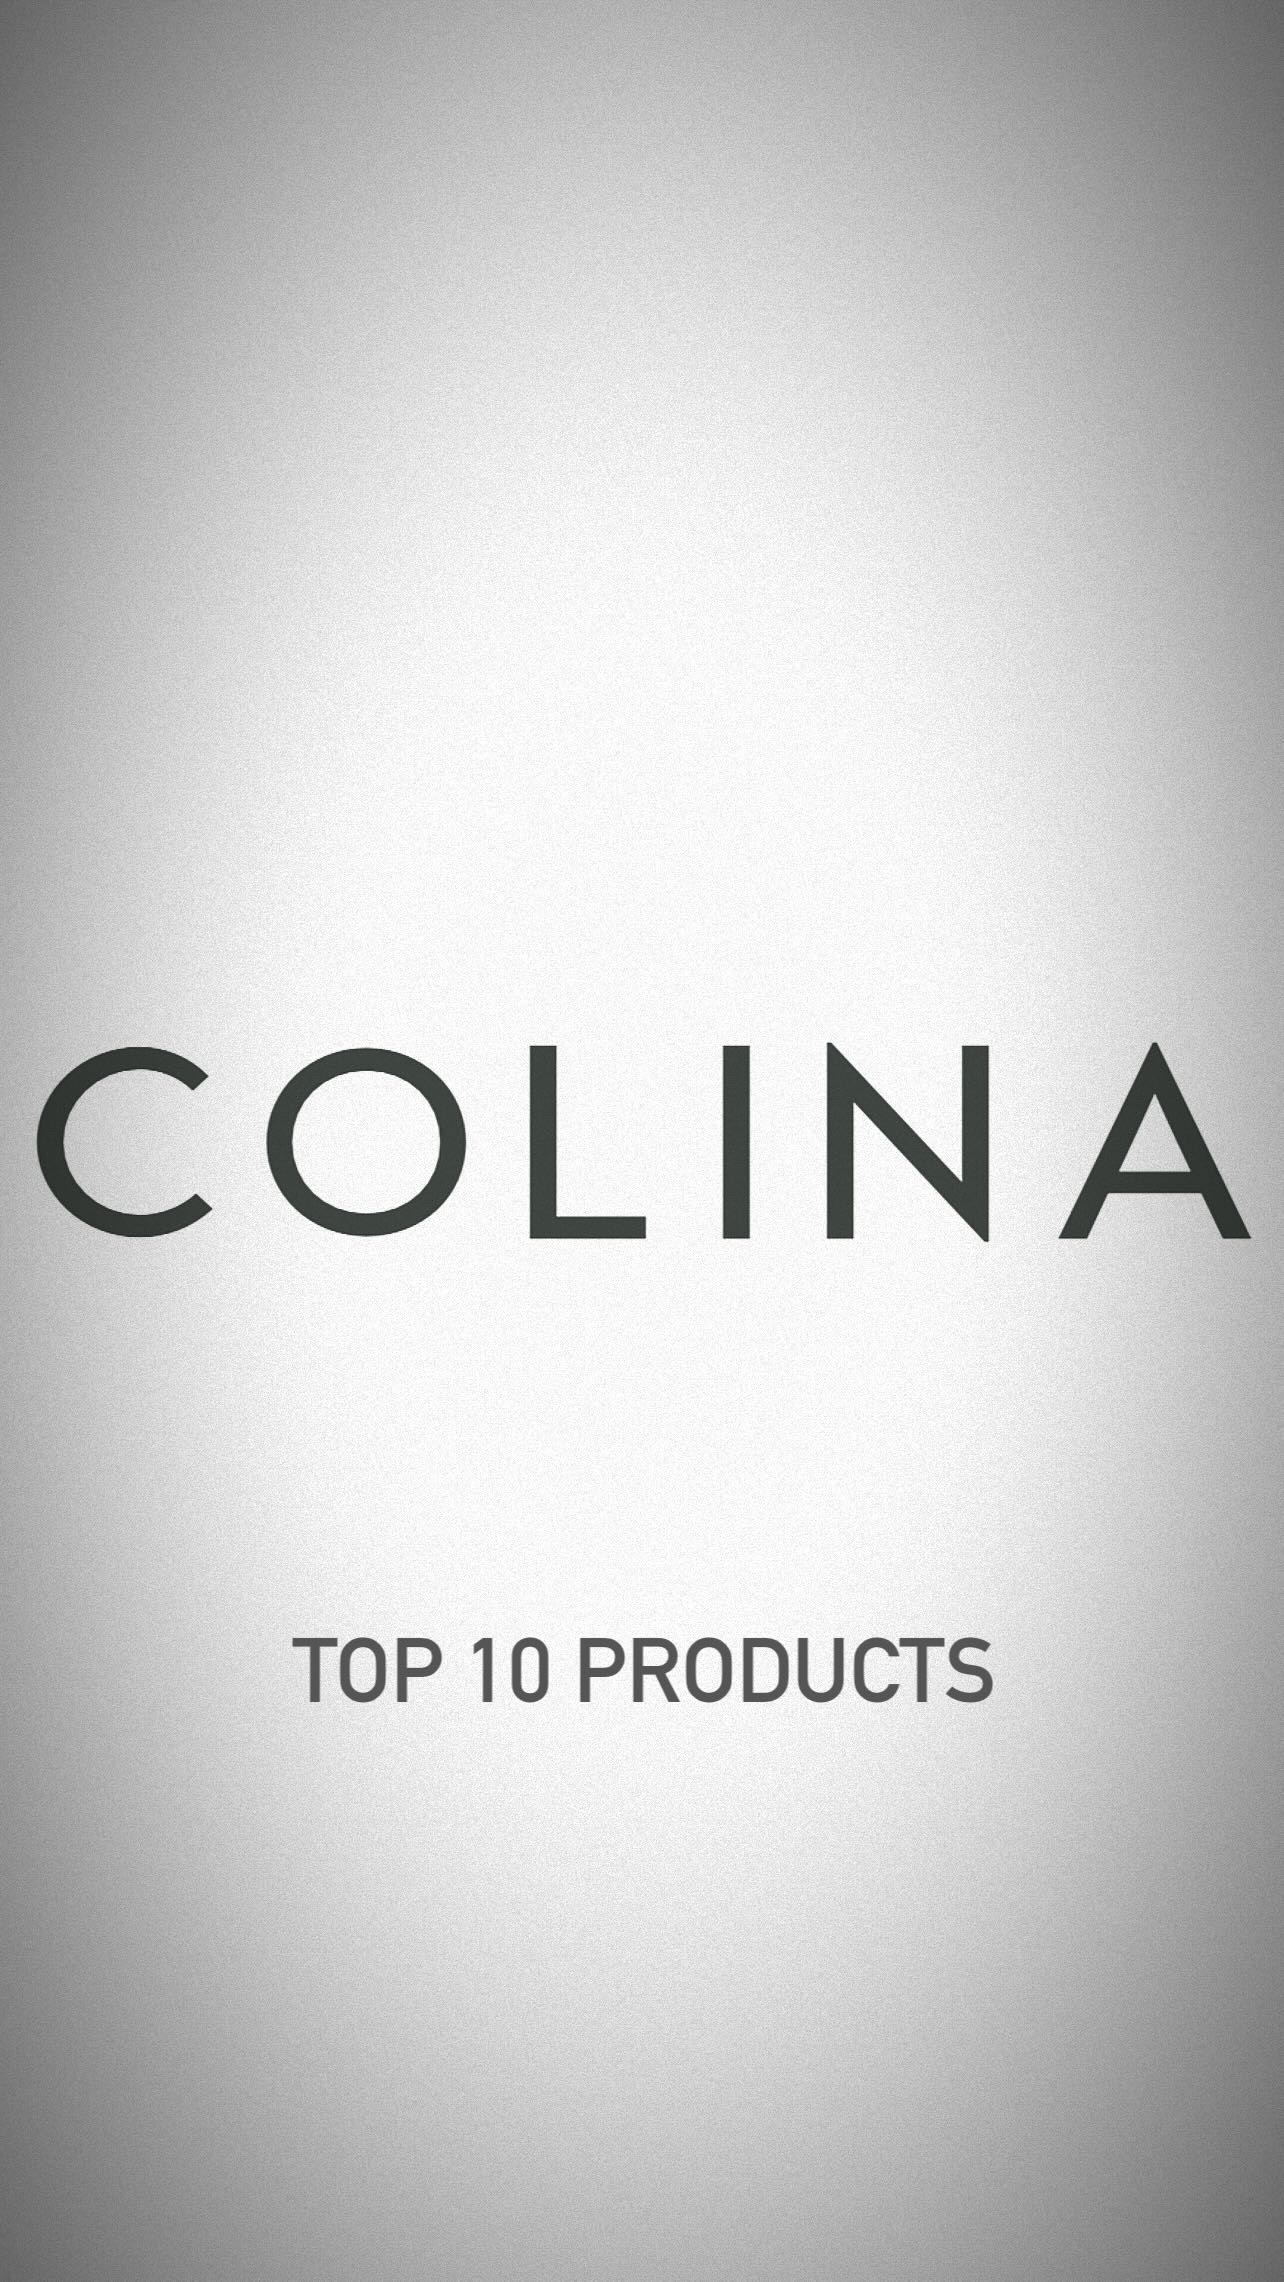 COLINA TOP 10 PRODUCTS について